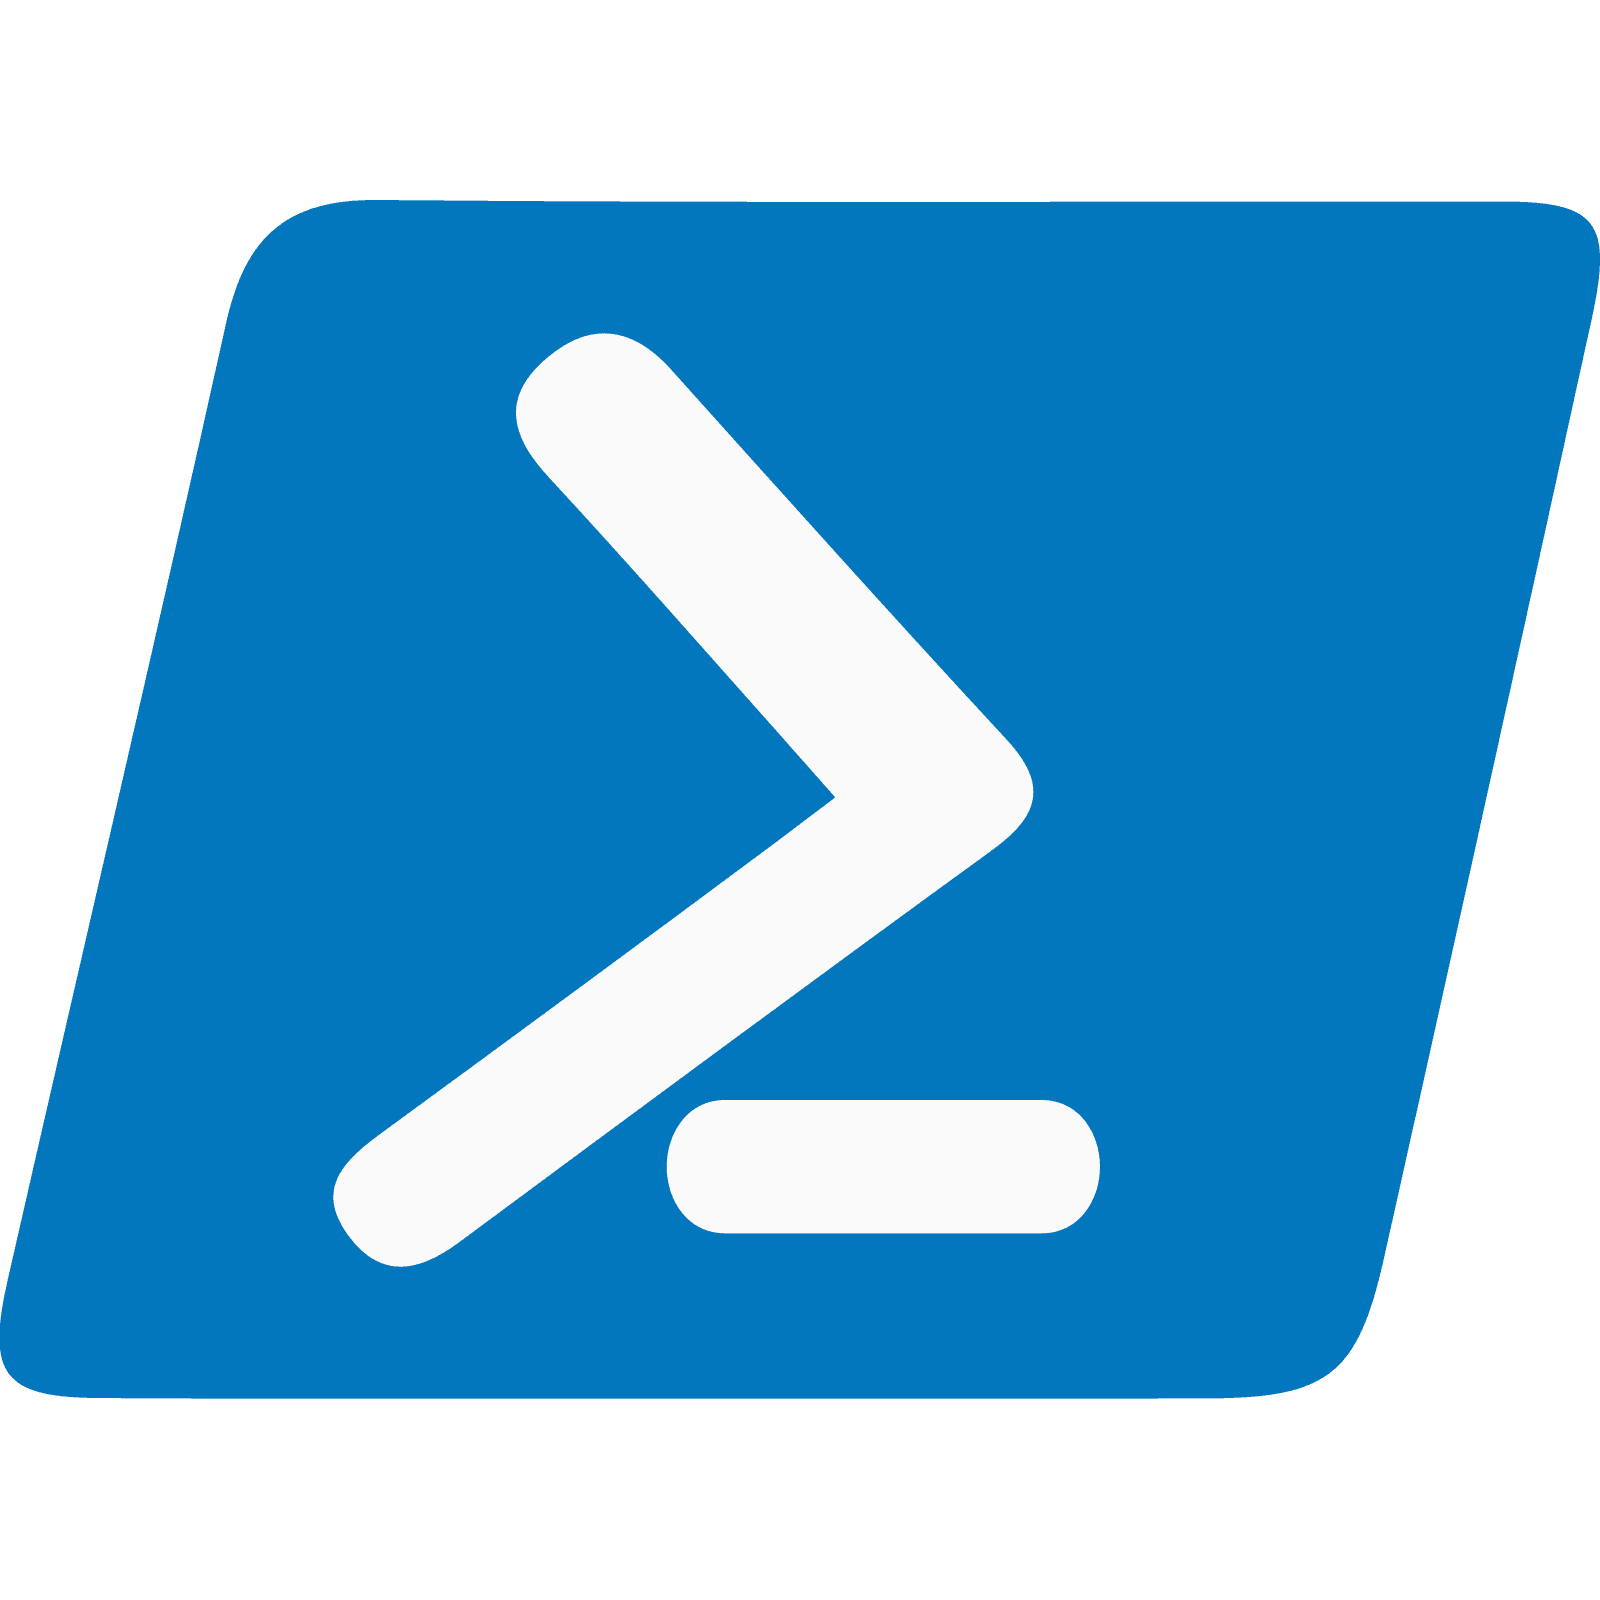 How to send an email using Powershell (Windows and cross-platform)